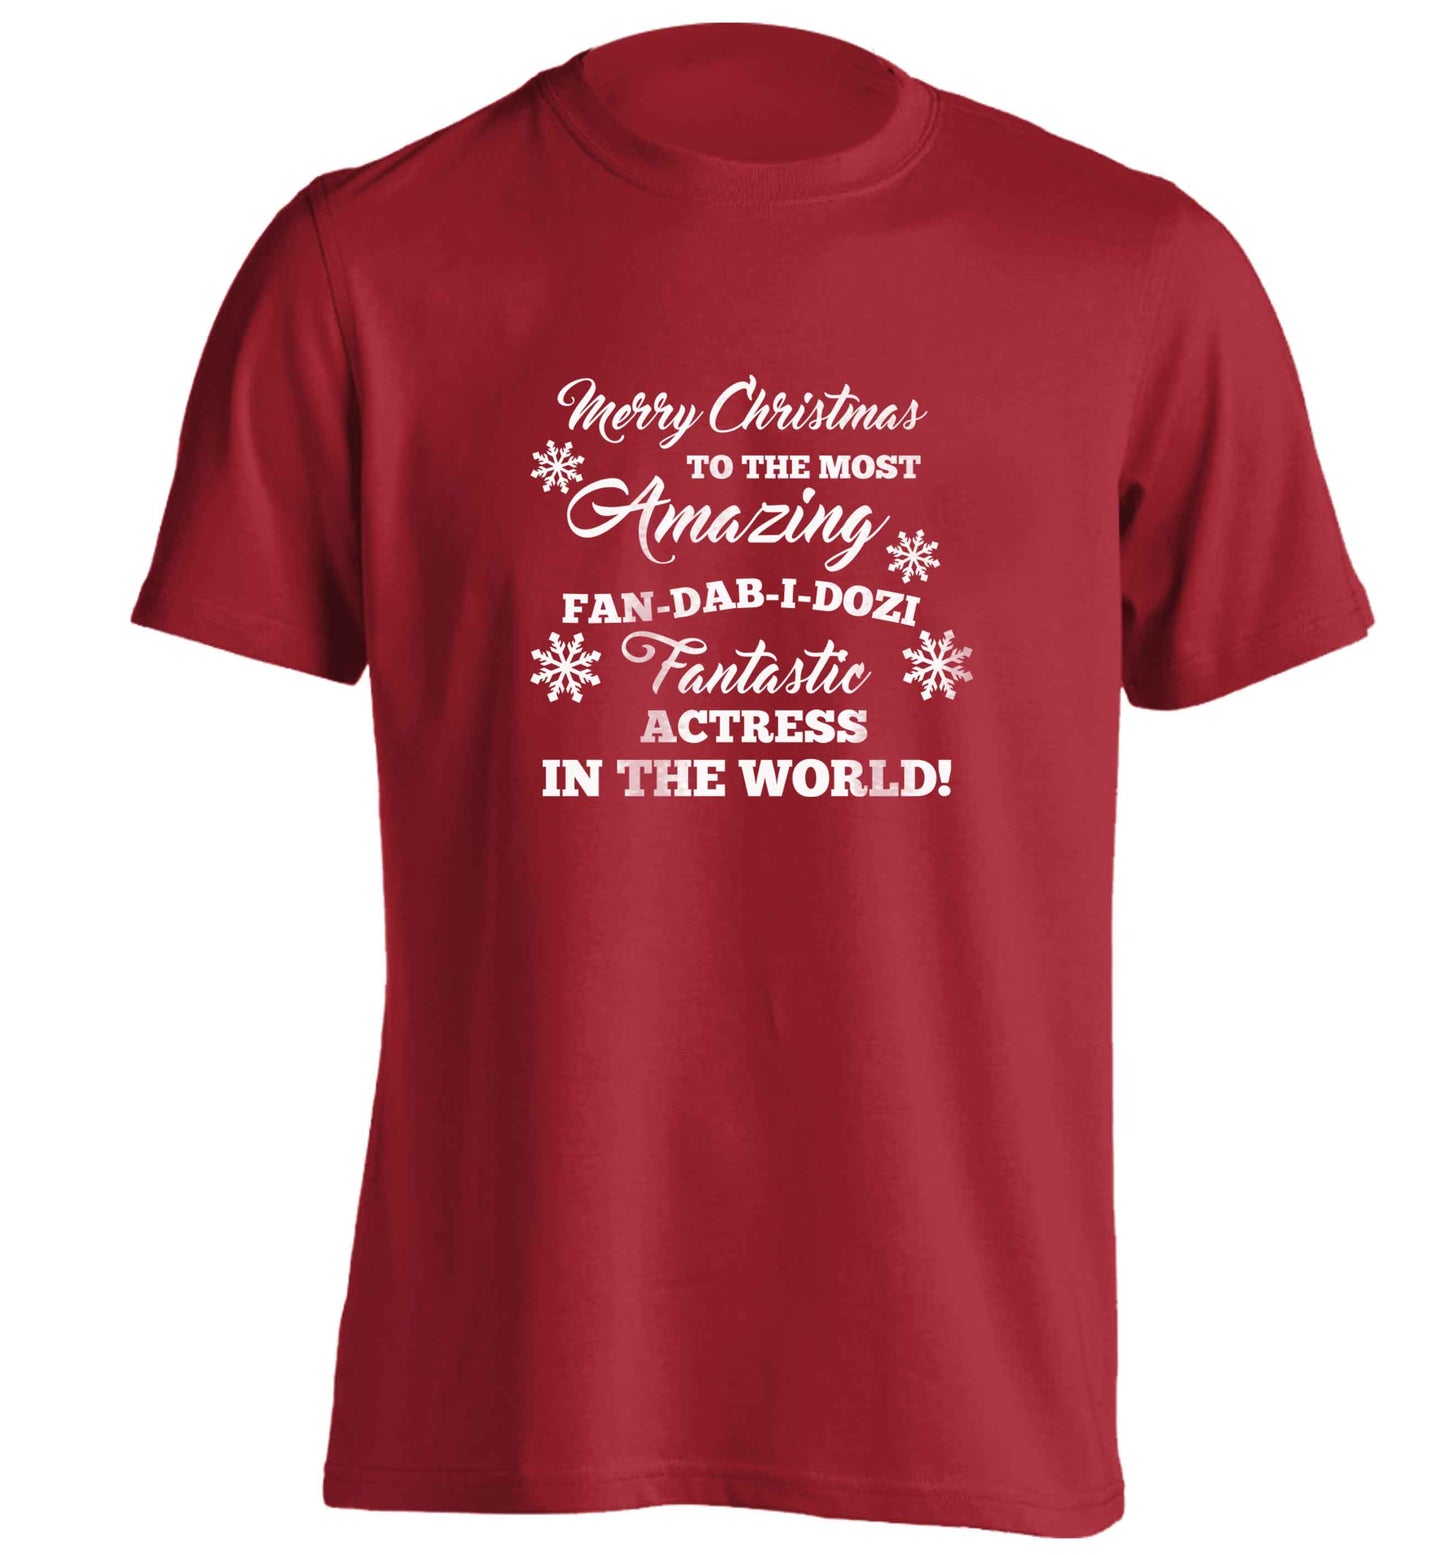 Merry Christmas to the most amazing actress in the world! adults unisex red Tshirt 2XL